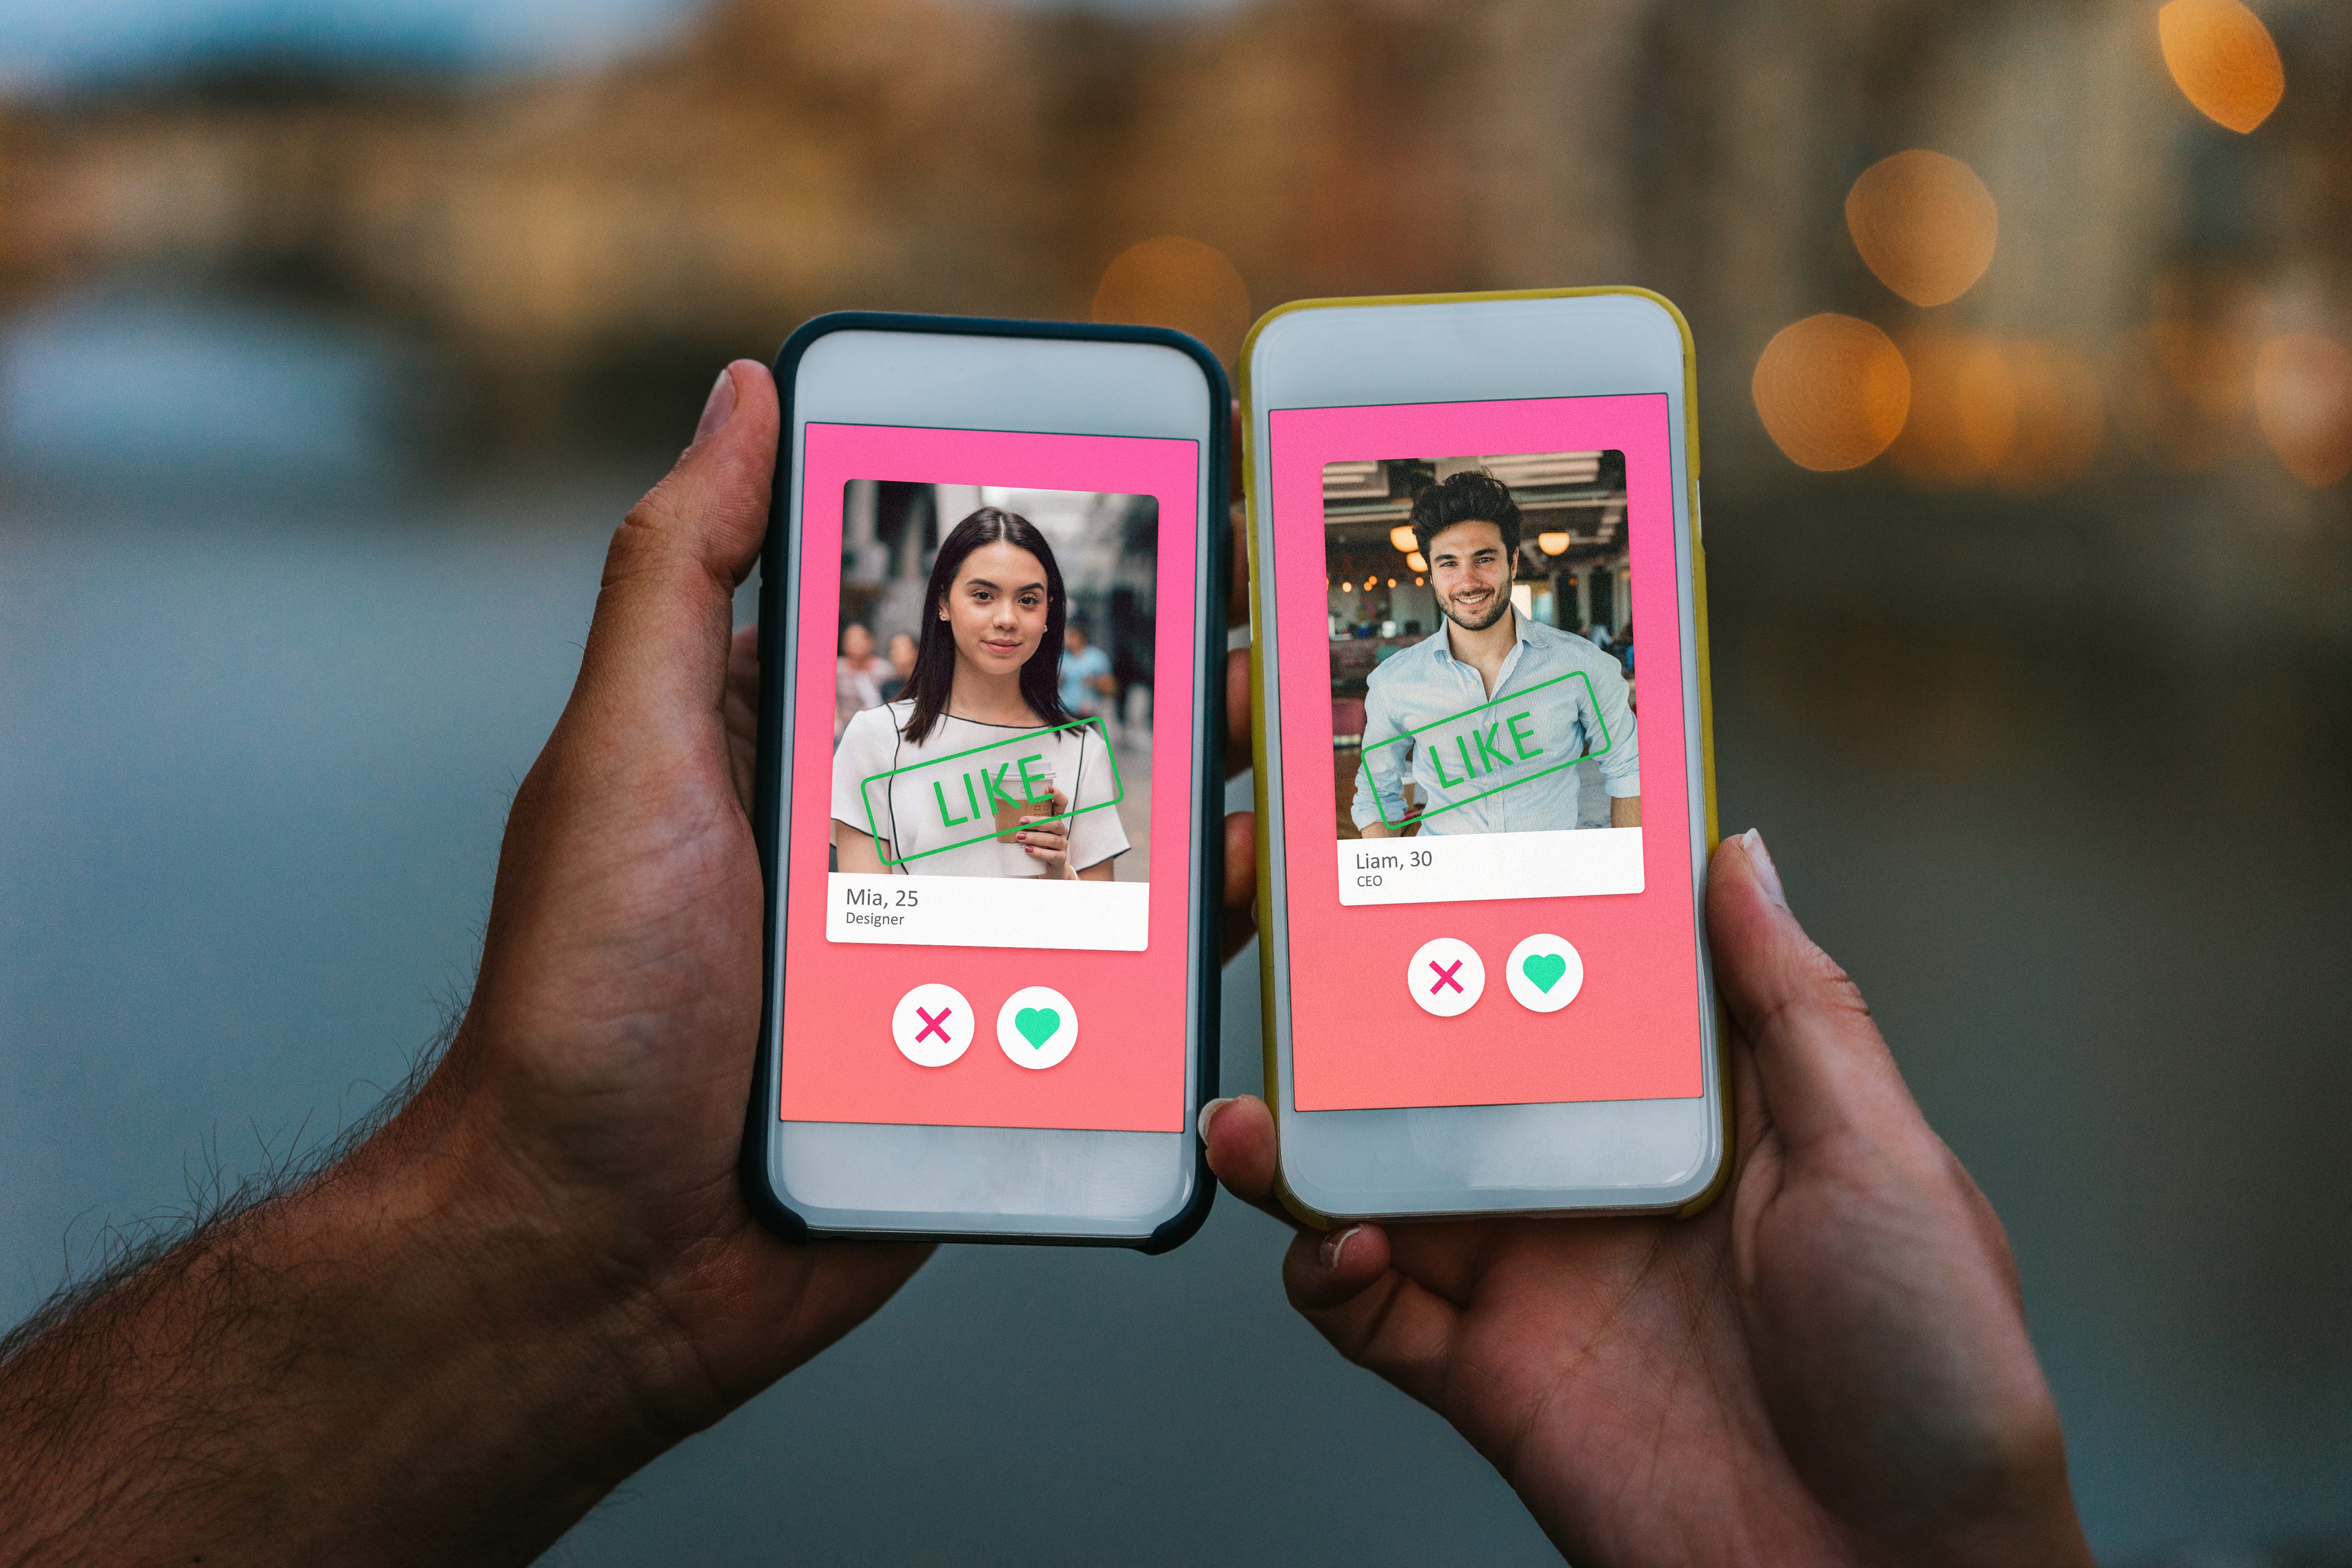 Online Dating: Does It Work For You? What Do You Think About It?